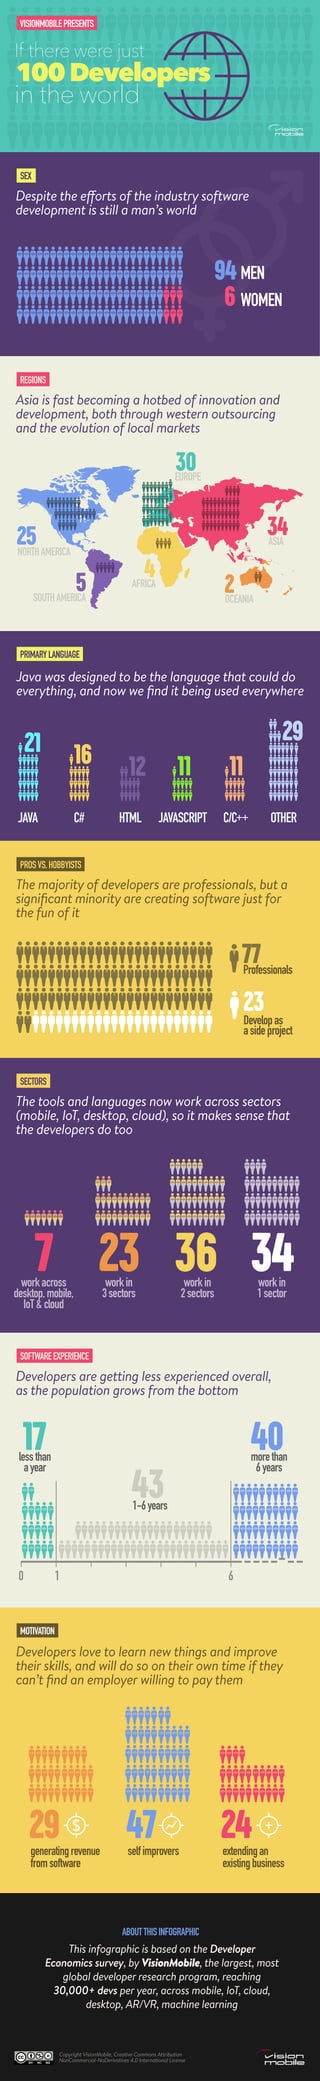 SOFTWAREEXPERIENCE
Despite the efforts of the industry software
development is still a man’s world
25
5 2
4
34
Java was designed to be the language that could do
everything, and now we ﬁnd it being used everywhere
The majority of developers are professionals, but a
signiﬁcant minority are creating software just for
the fun of it
Professionals
workin
1sector
lessthan
ayear
selfimproversgeneratingrevenue
fromsoftware
extendingan
existingbusiness
morethan
6years
Developers are getting less experienced overall,
as the population grows from the bottom
1 60
The tools and languages now work across sectors
(mobile, IoT, desktop, cloud), so it makes sense that
the developers do too
Asia is fast becoming a hotbed of innovation and
development, both through western outsourcing
and the evolution of local markets
If there were just
in the world
100 Developers
MEN
EUROPE
ASIA
AFRICA
OCEANIA
NORTHAMERICA
SOUTHAMERICA
94
WOMEN6
JAVA JAVASCRIPT OTHERC#
21
77
34
17
1-6years
43
workin
2sectors
workin
3sectors
workacross
desktop,mobile,
IoT&cloud
36237
Developas
asideproject
23
16 11
HTML
12 11
29
4729 24
C/C++
VISIONMOBILEPRESENTS
SEX
REGIONS
PRIMARYLANGUAGE
MOTIVATION
ABOUTTHISINFOGRAPHIC
PROSVS.HOBBYISTS
SECTORS
Developers love to learn new things and improve
their skills, and will do so on their own time if they
can’t ﬁnd an employer willing to pay them
Copyright VisionMobile, Creative Commons Attribution
NonCommercial-NoDerivatives 4.0 International License
This infographic is based on the Developer
Economics survey, by VisionMobile, the largest, most
global developer research program, reaching
30,000+ devs per year, across mobile, IoT, cloud,
desktop, AR/VR, machine learning
 